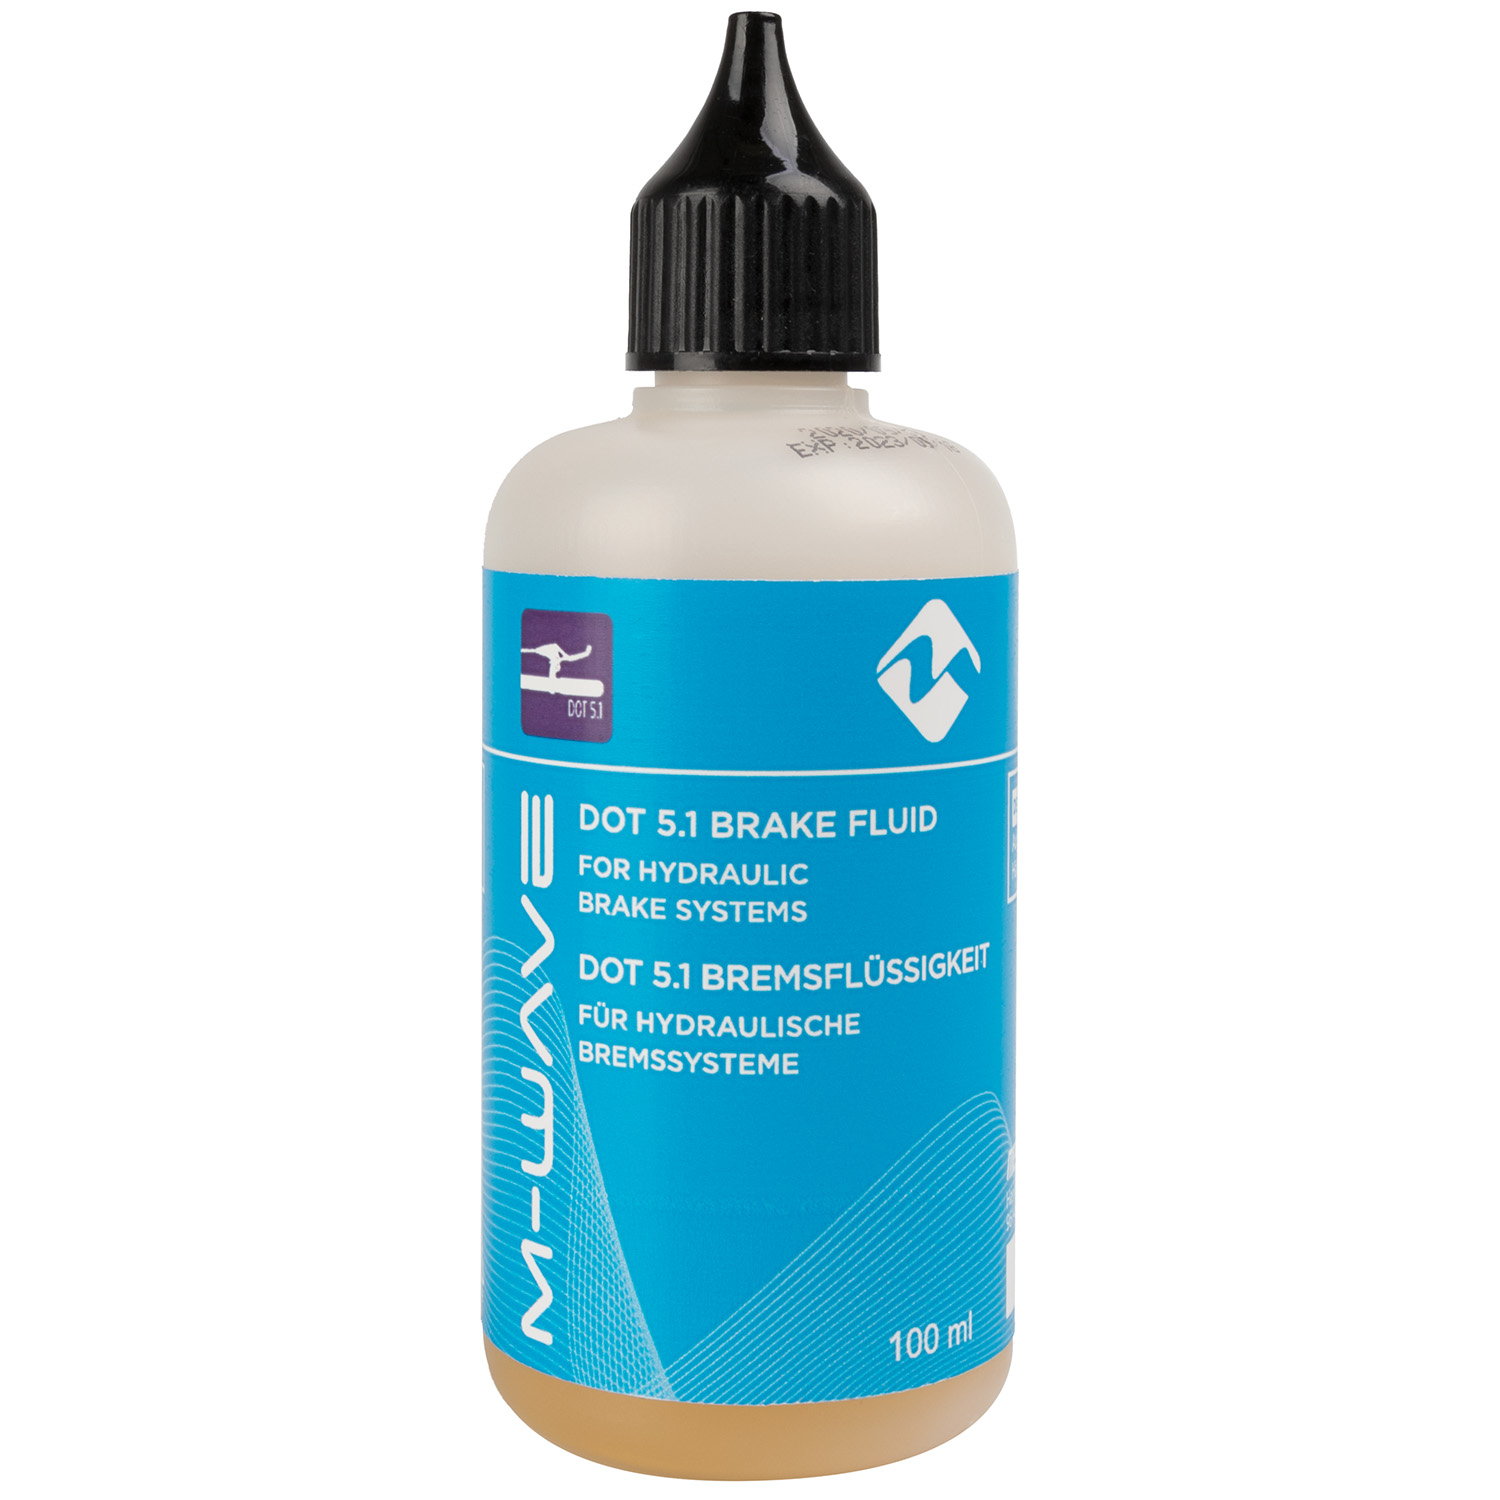 365900 M-WAVE brake liquid DOT 5.1 – AVAILABLE IN SELECTED BIKE SHOP